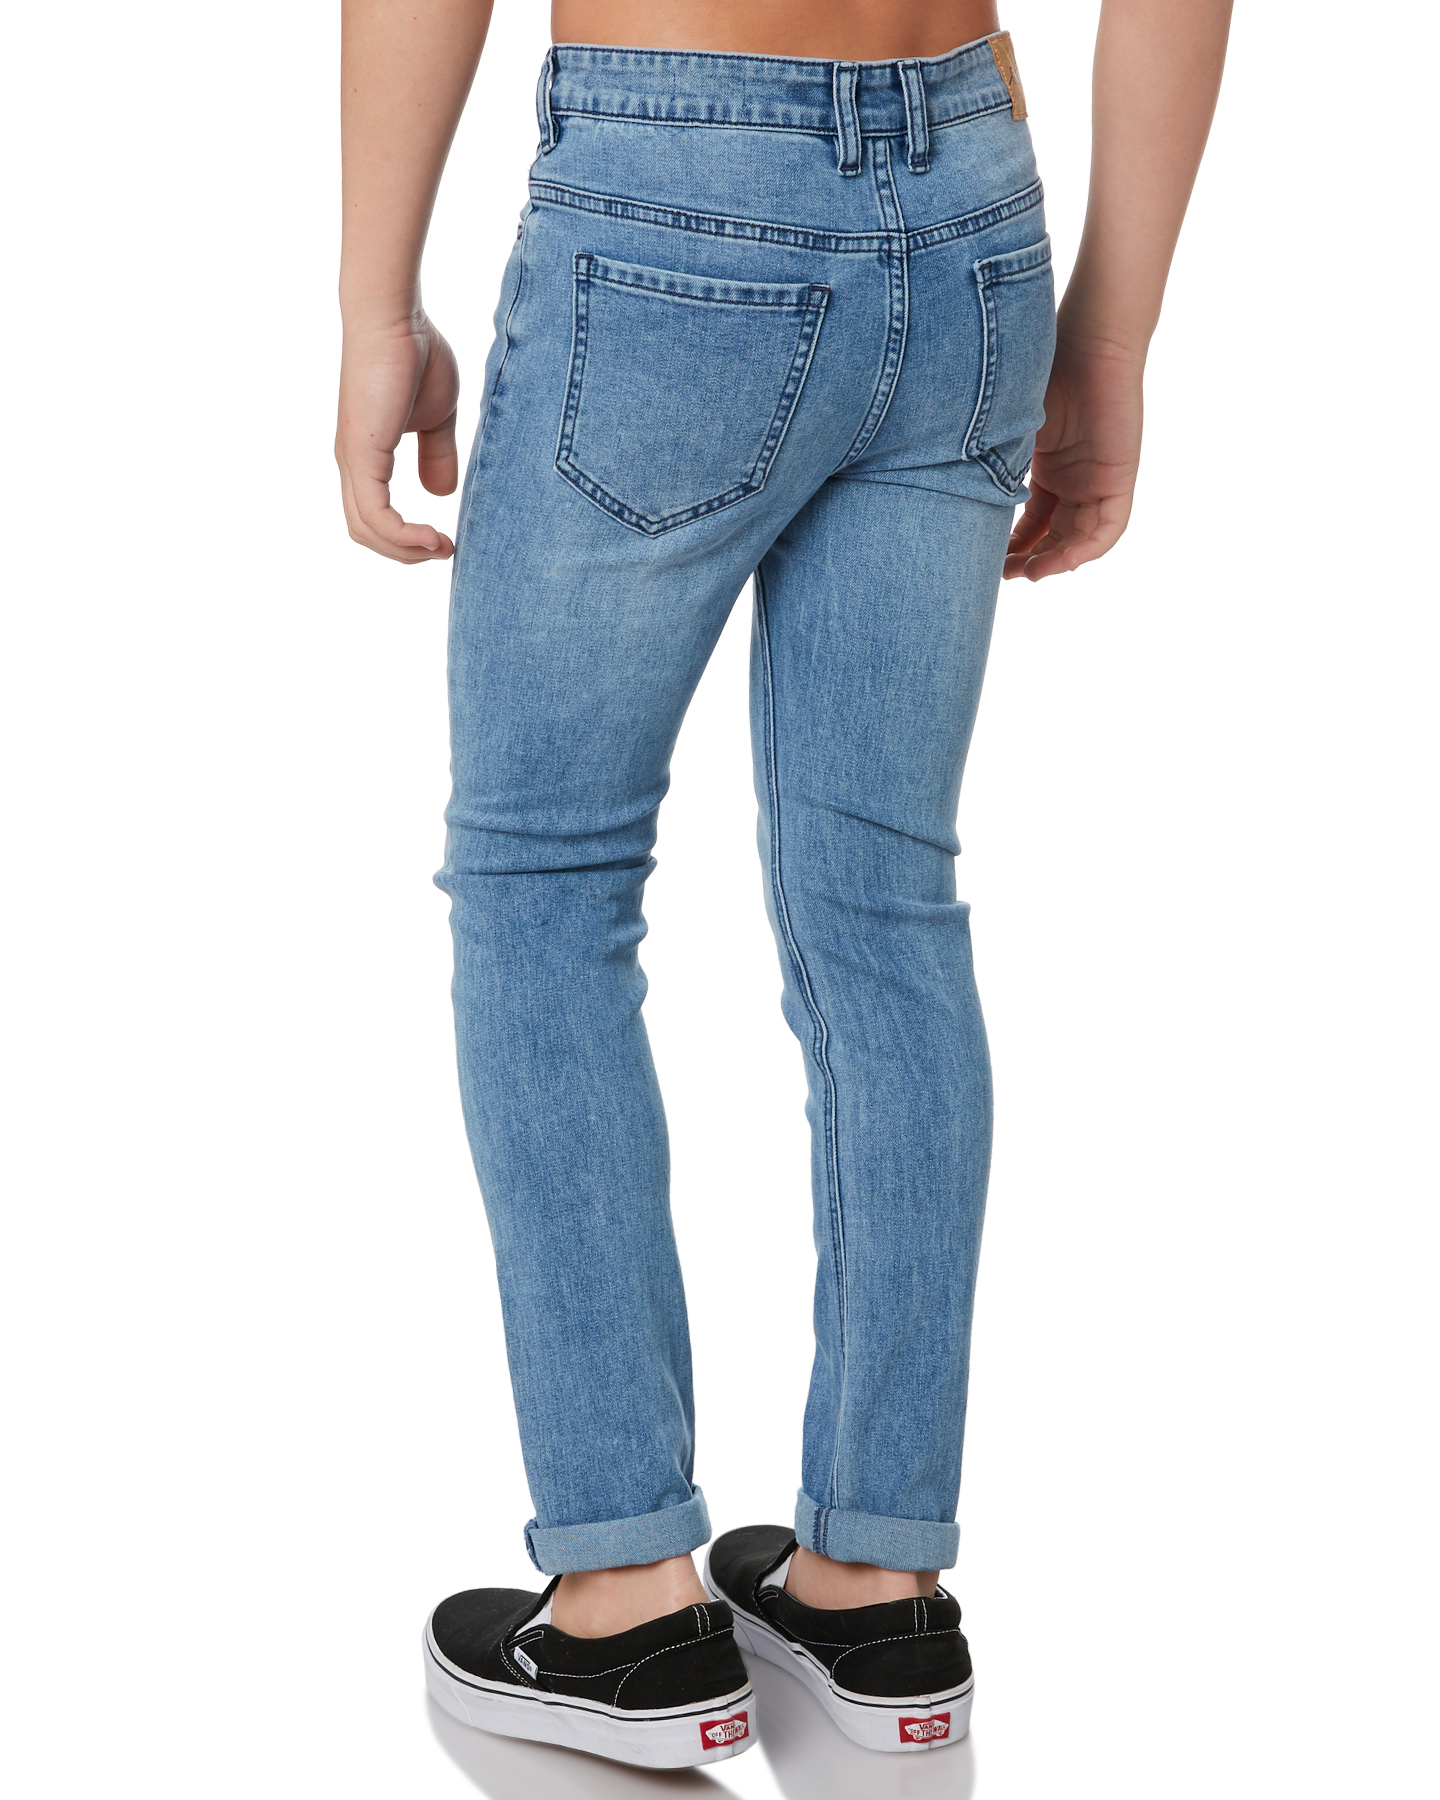 Riders By Lee Youth Boys Slim Jim Jeans - Light Vintage | SurfStitch